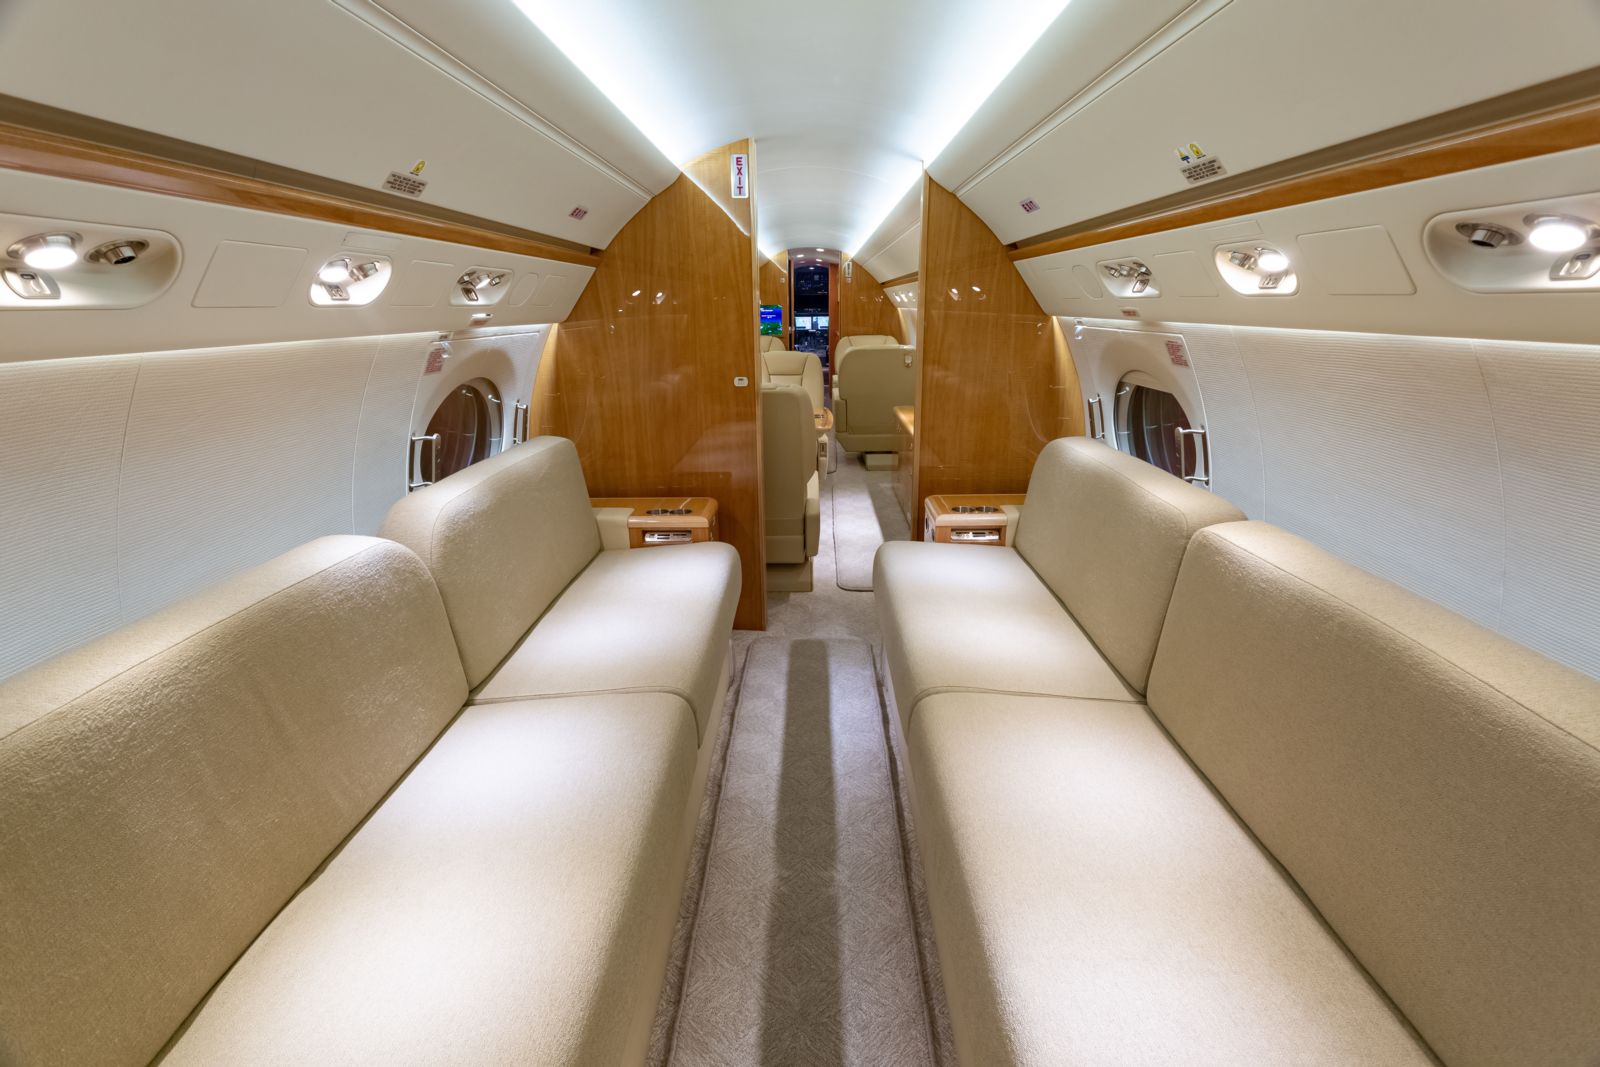 Gulfstream G550  S/N 5370 for sale | gallery image: /userfiles/images/G550_sn5370/aft%20fwd.jpg